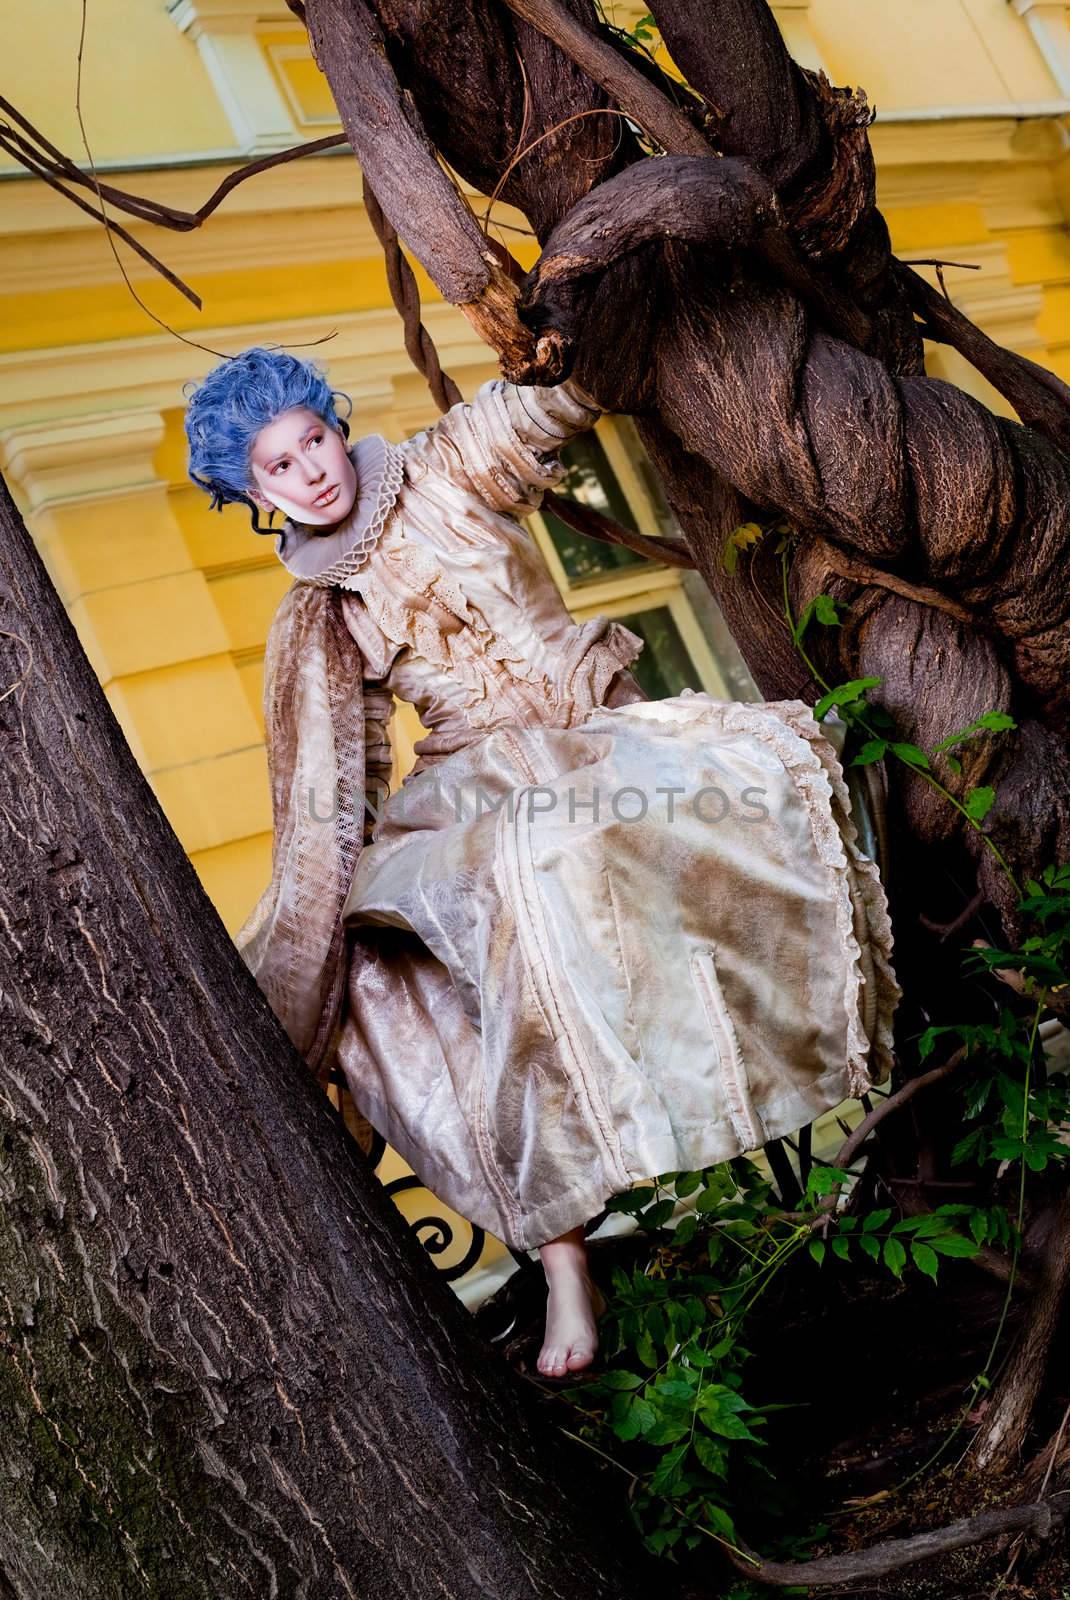 Female with medieval dress and blue wig sitting barefoot on a fence